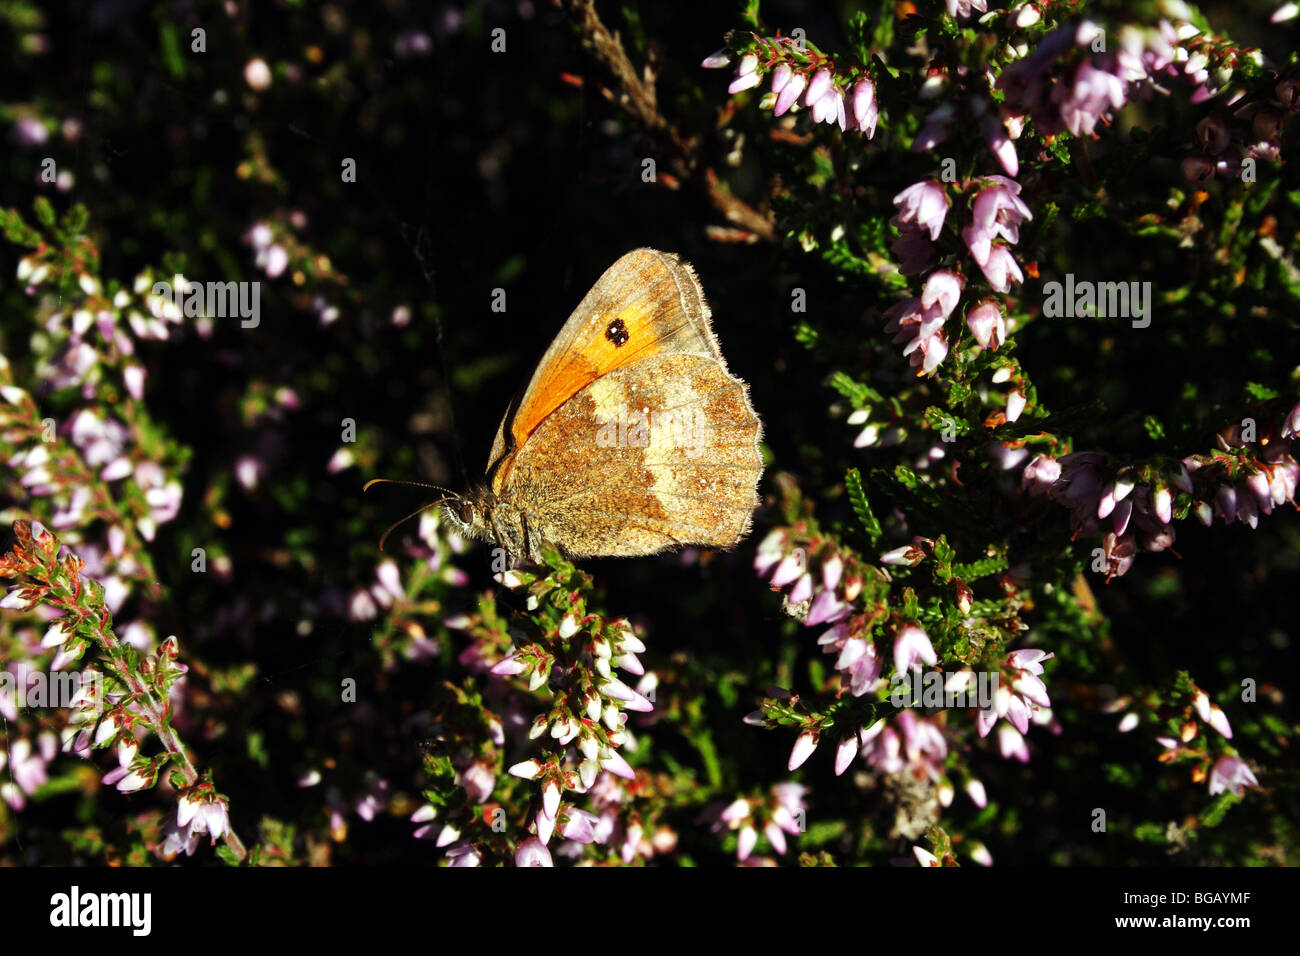 Gatekeeper Butterfly or Hedge Brown Pyronia tithonus Family Nymphalidae pictured nectaring on Heather Stock Photo